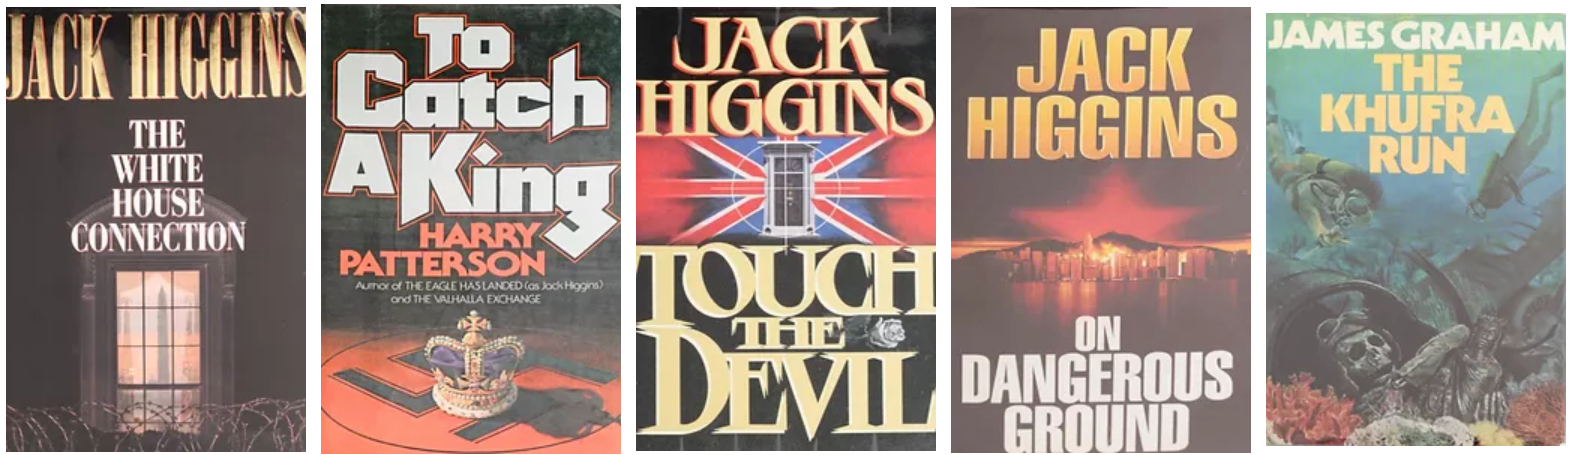 Jack Higgins RIP: 5 Quirky Facts about The Eagle Has Landed Spy Author